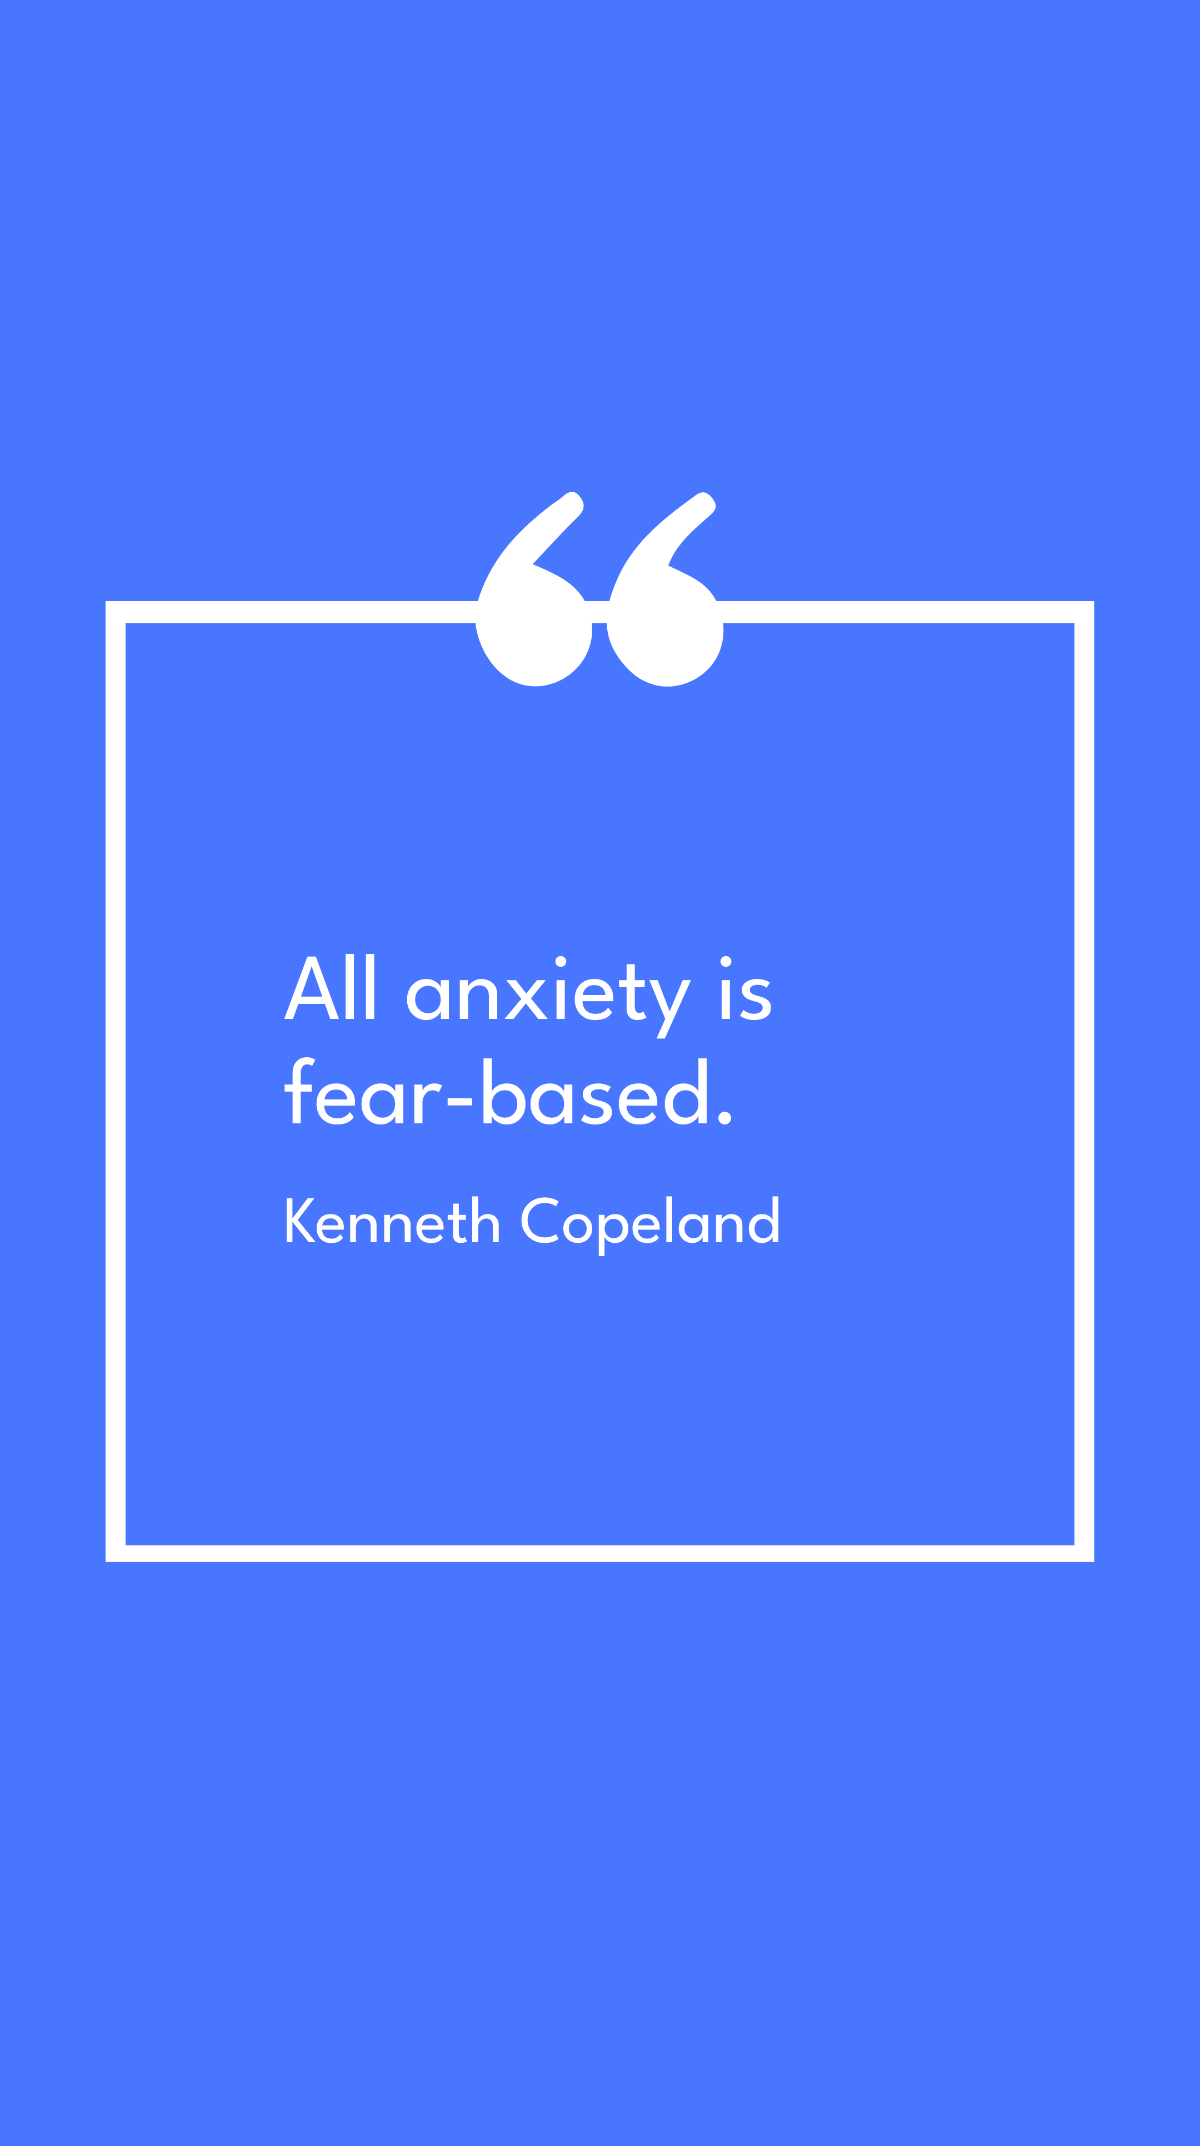 Kenneth Copeland - All anxiety is fear-based. Template